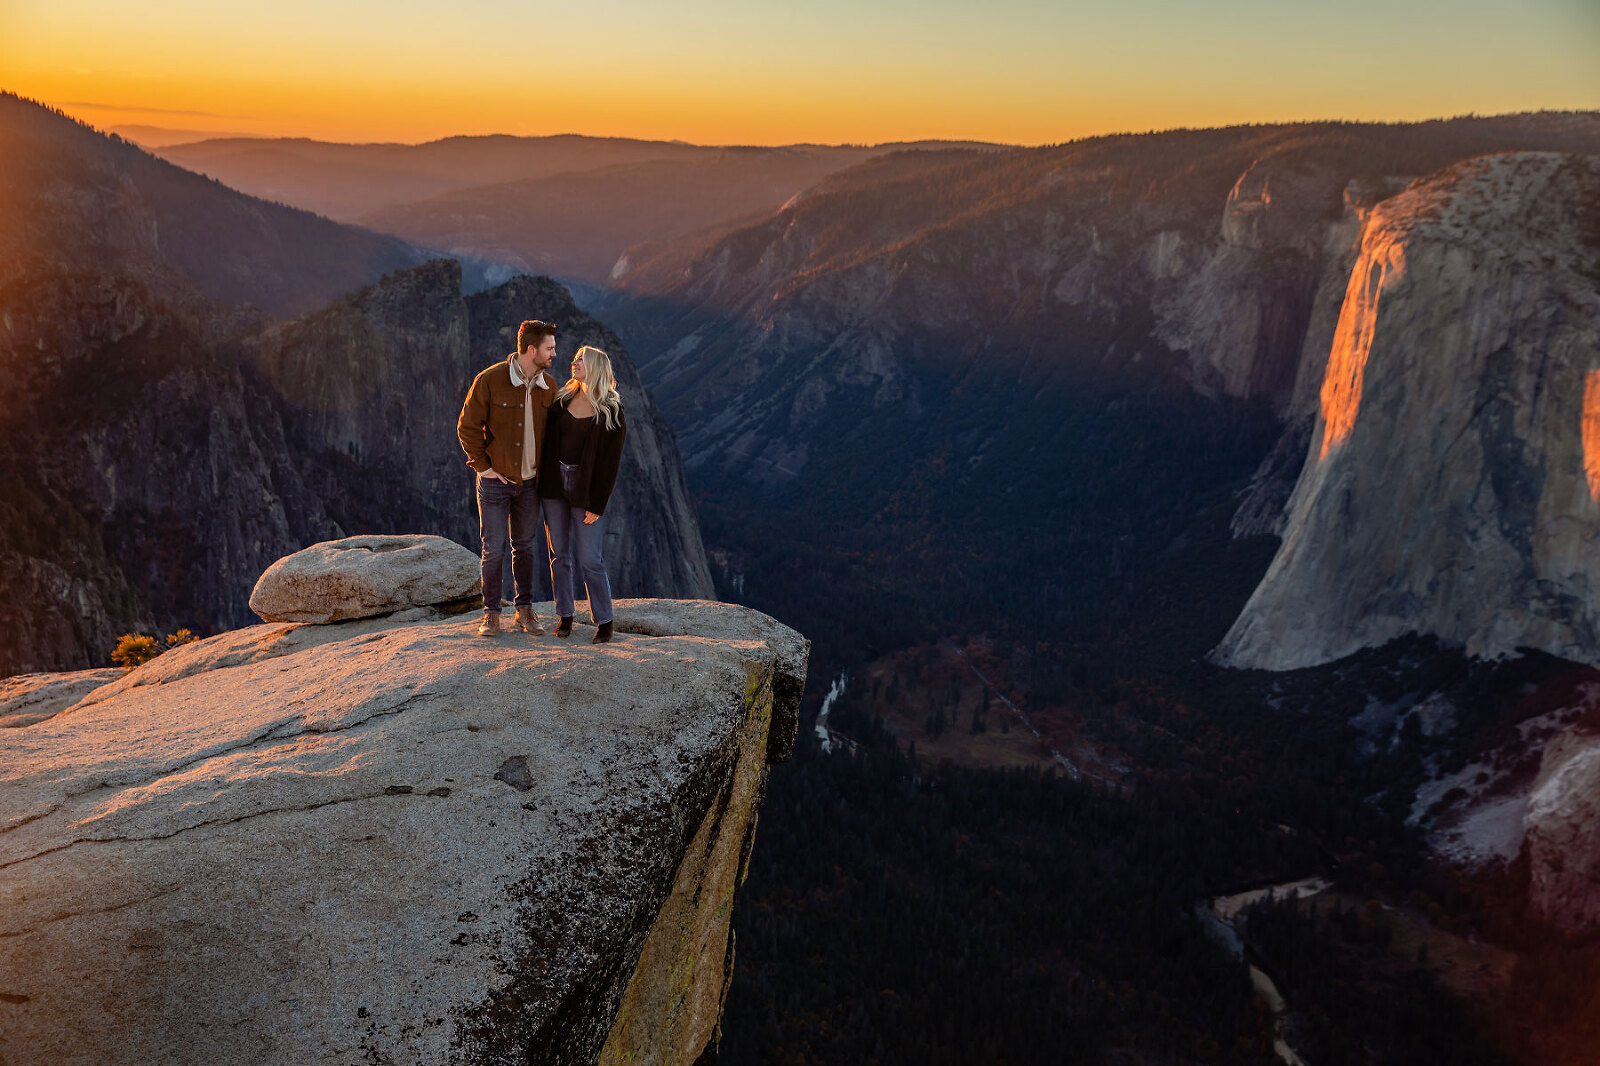 A couple in love on top of mountain during sunset.